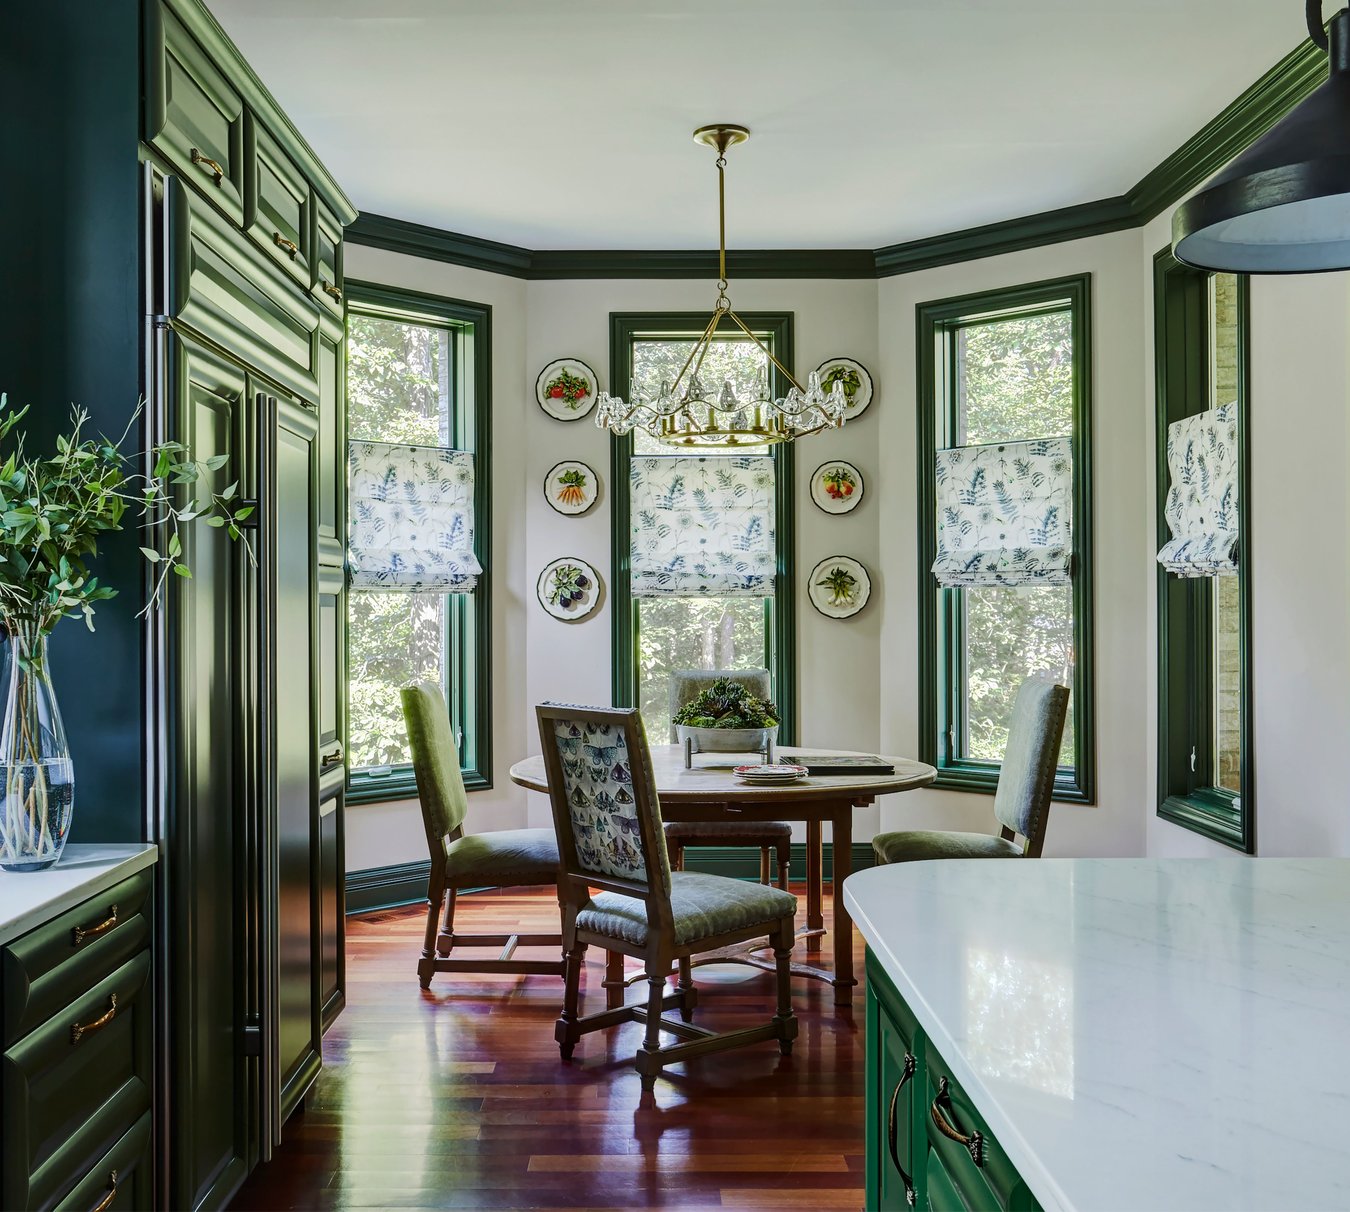 A dining room beside a kitchen designed by Jasmin Reese in bright green and marble, Chicago. 